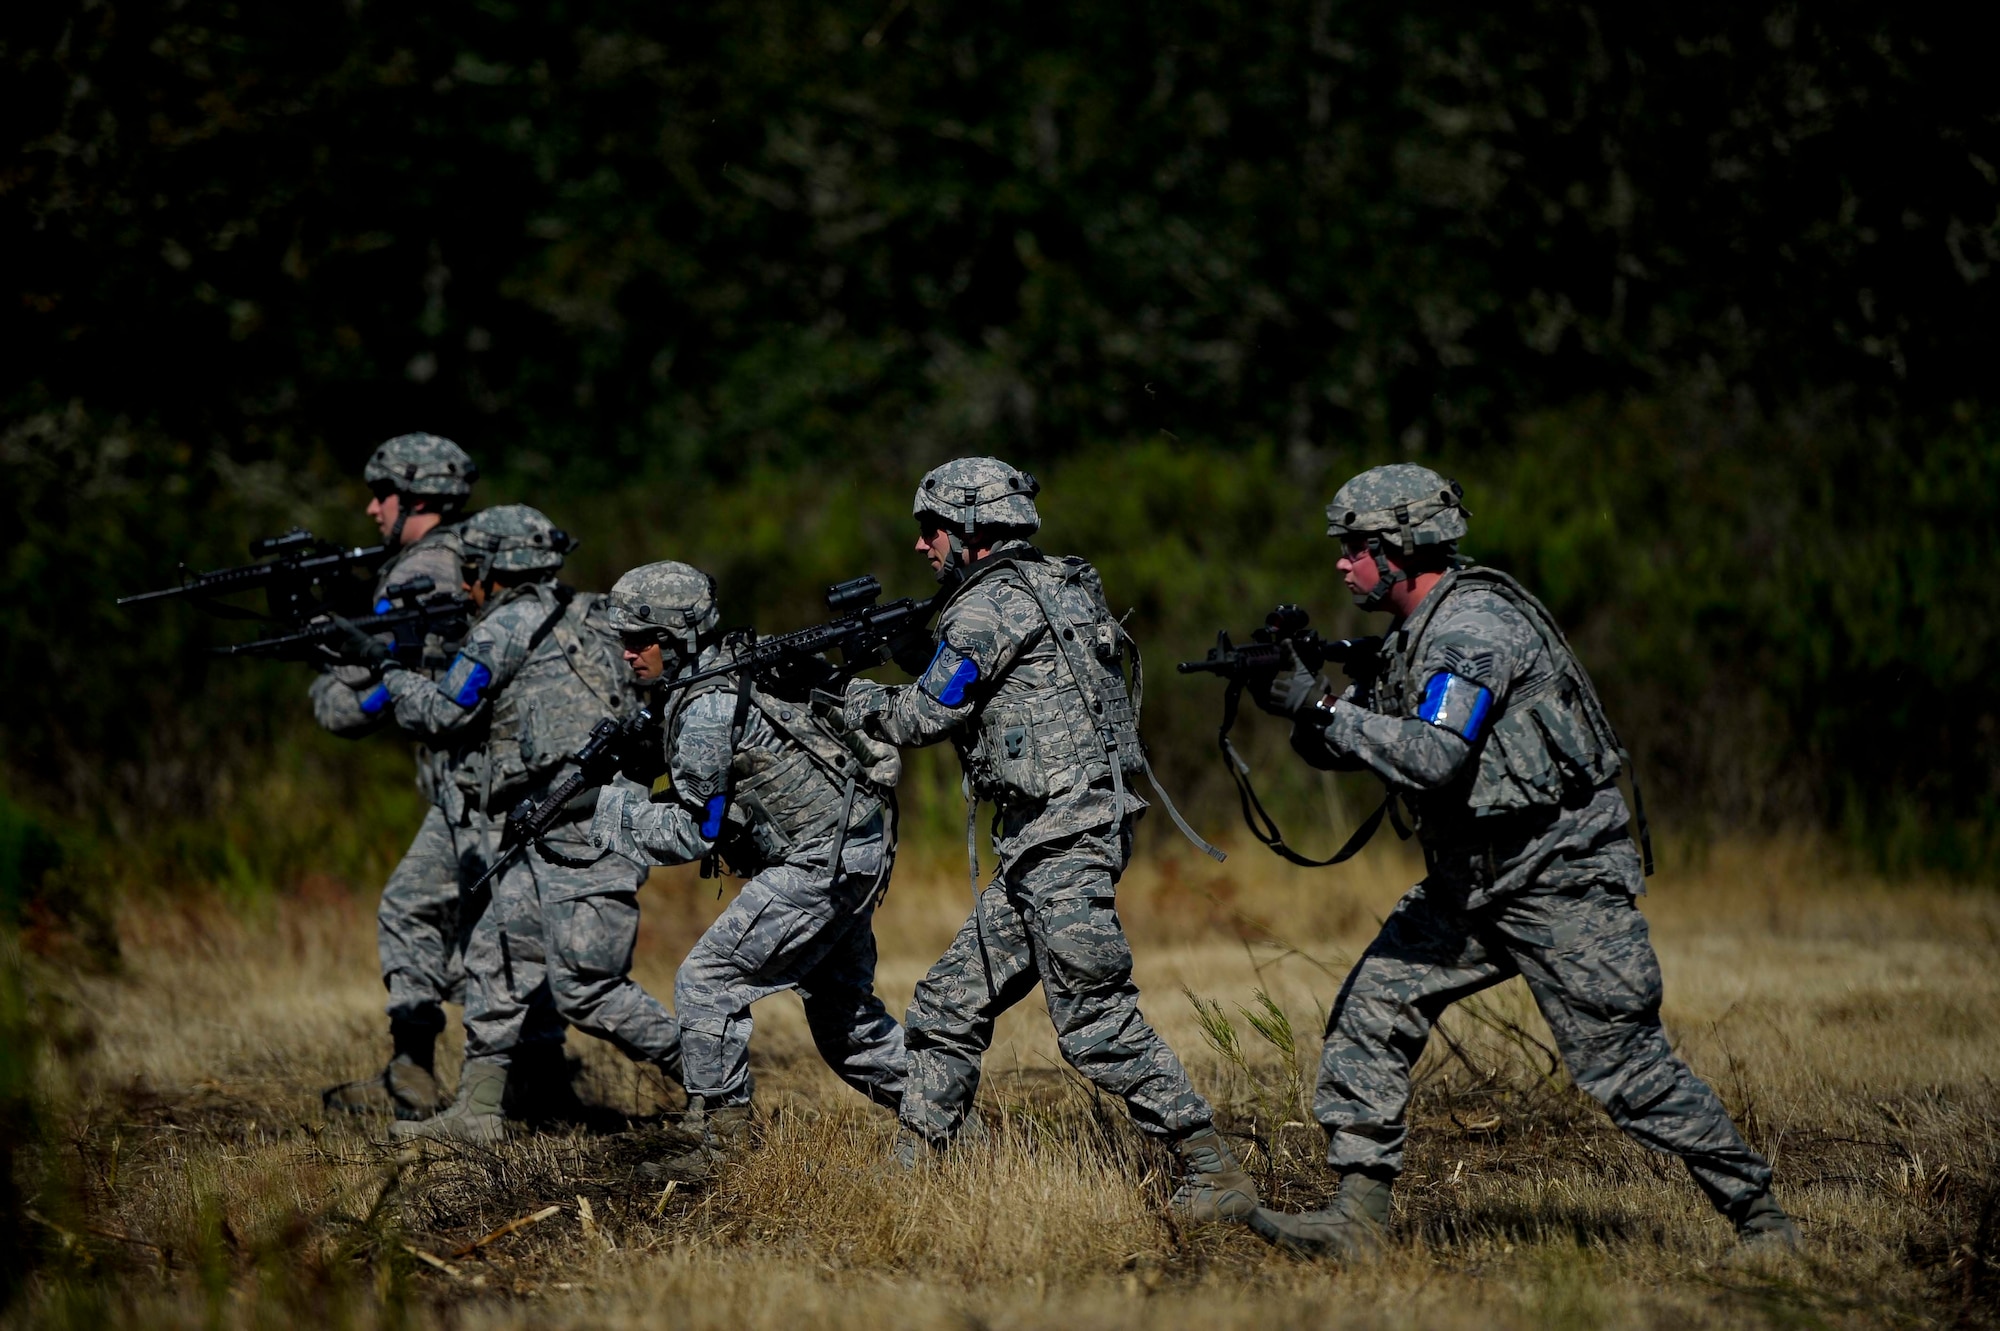 Security Forces Squadron Airmen from the 446th Airlift Wing at Joint Base Lewis-McChord participate in a field training exercise to simulate combat conditions when deployed. (U.S. Air Force Reserve photo by Staff Sgt. Daniel Liddicoet)